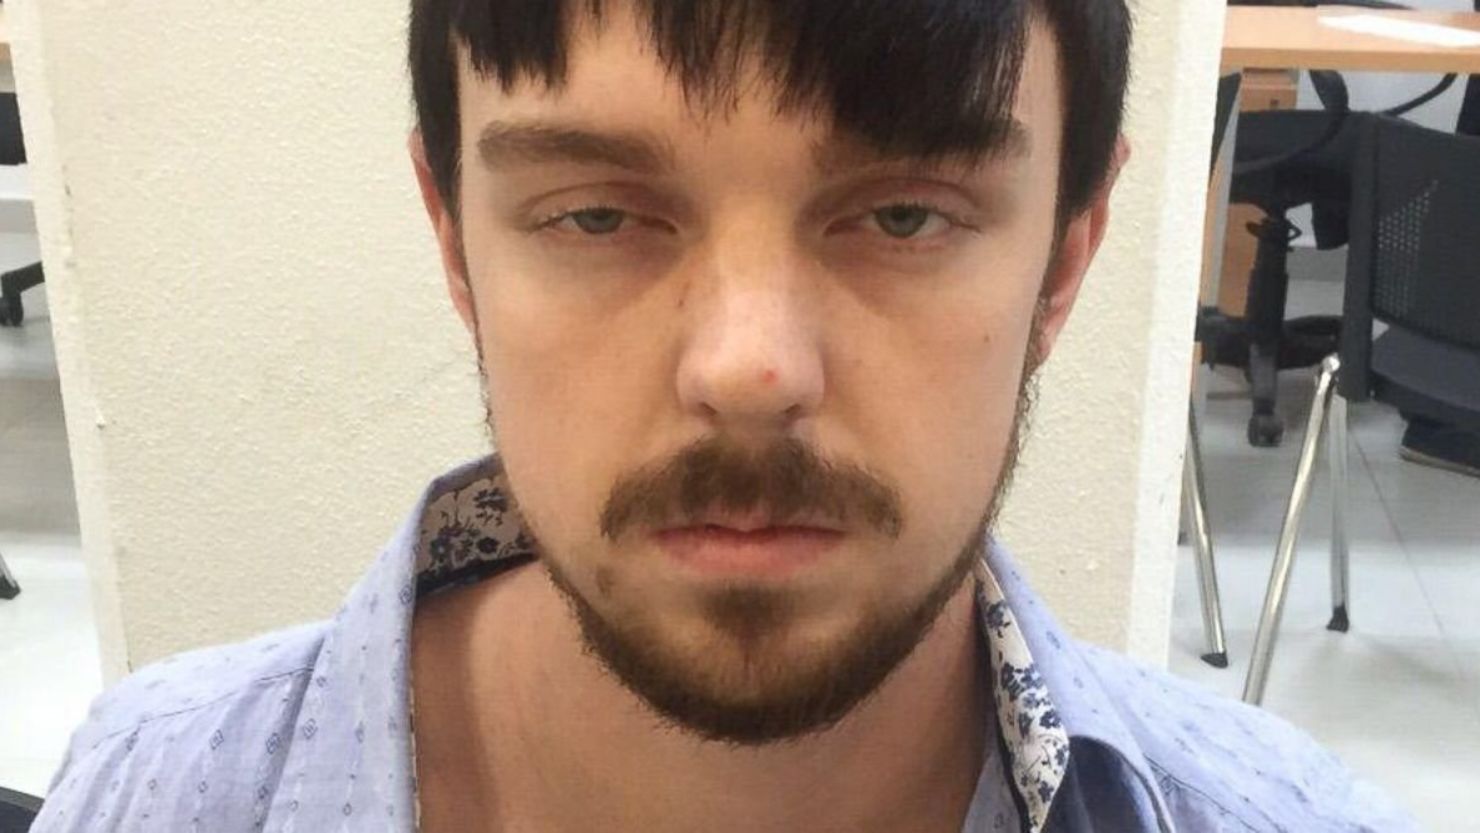 Ethan Couch, shown here while in custody in Mexico in December, has been detained since authorities escorted him back to Texas in January.